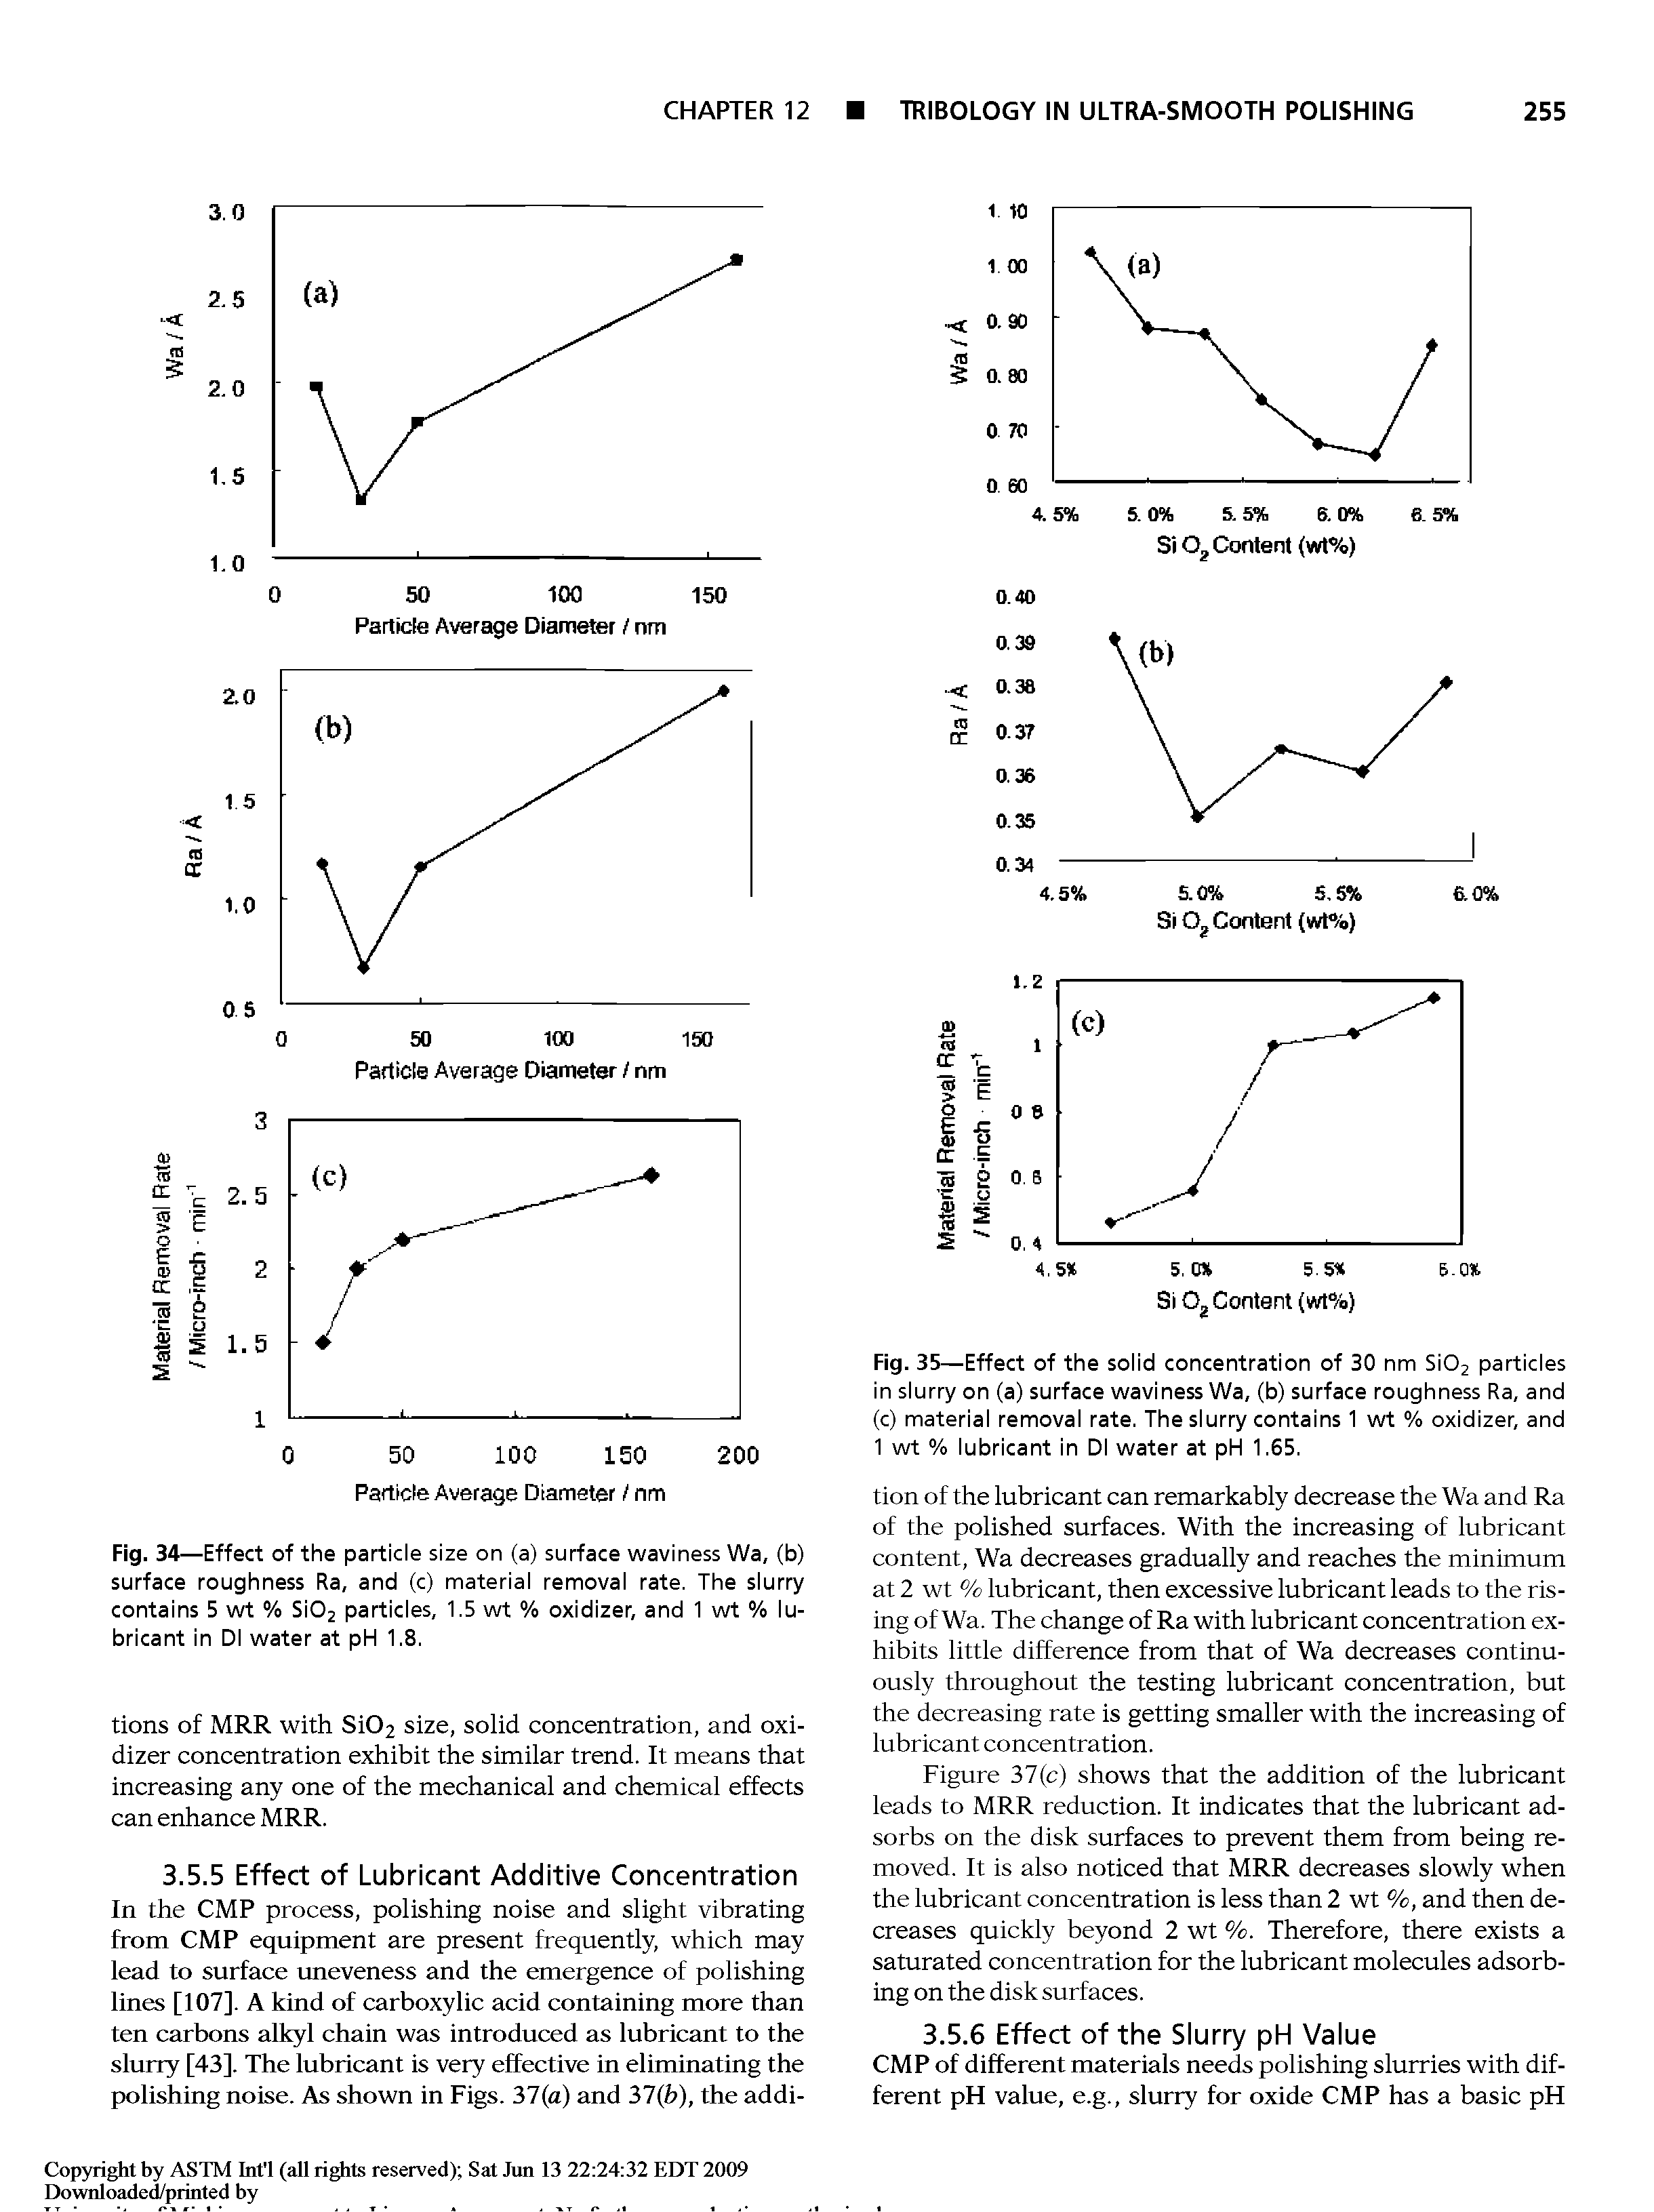 Fig. 34 —Effect of the particle size on (a) surface waviness Wa, (b) surface roughness Ra, and (c) material removal rate. The slurry contains 5 wt % SIO2 particles, 1.5 wt % oxidizer, and 1 wt % lubricant In Dl water at pH 1.8.